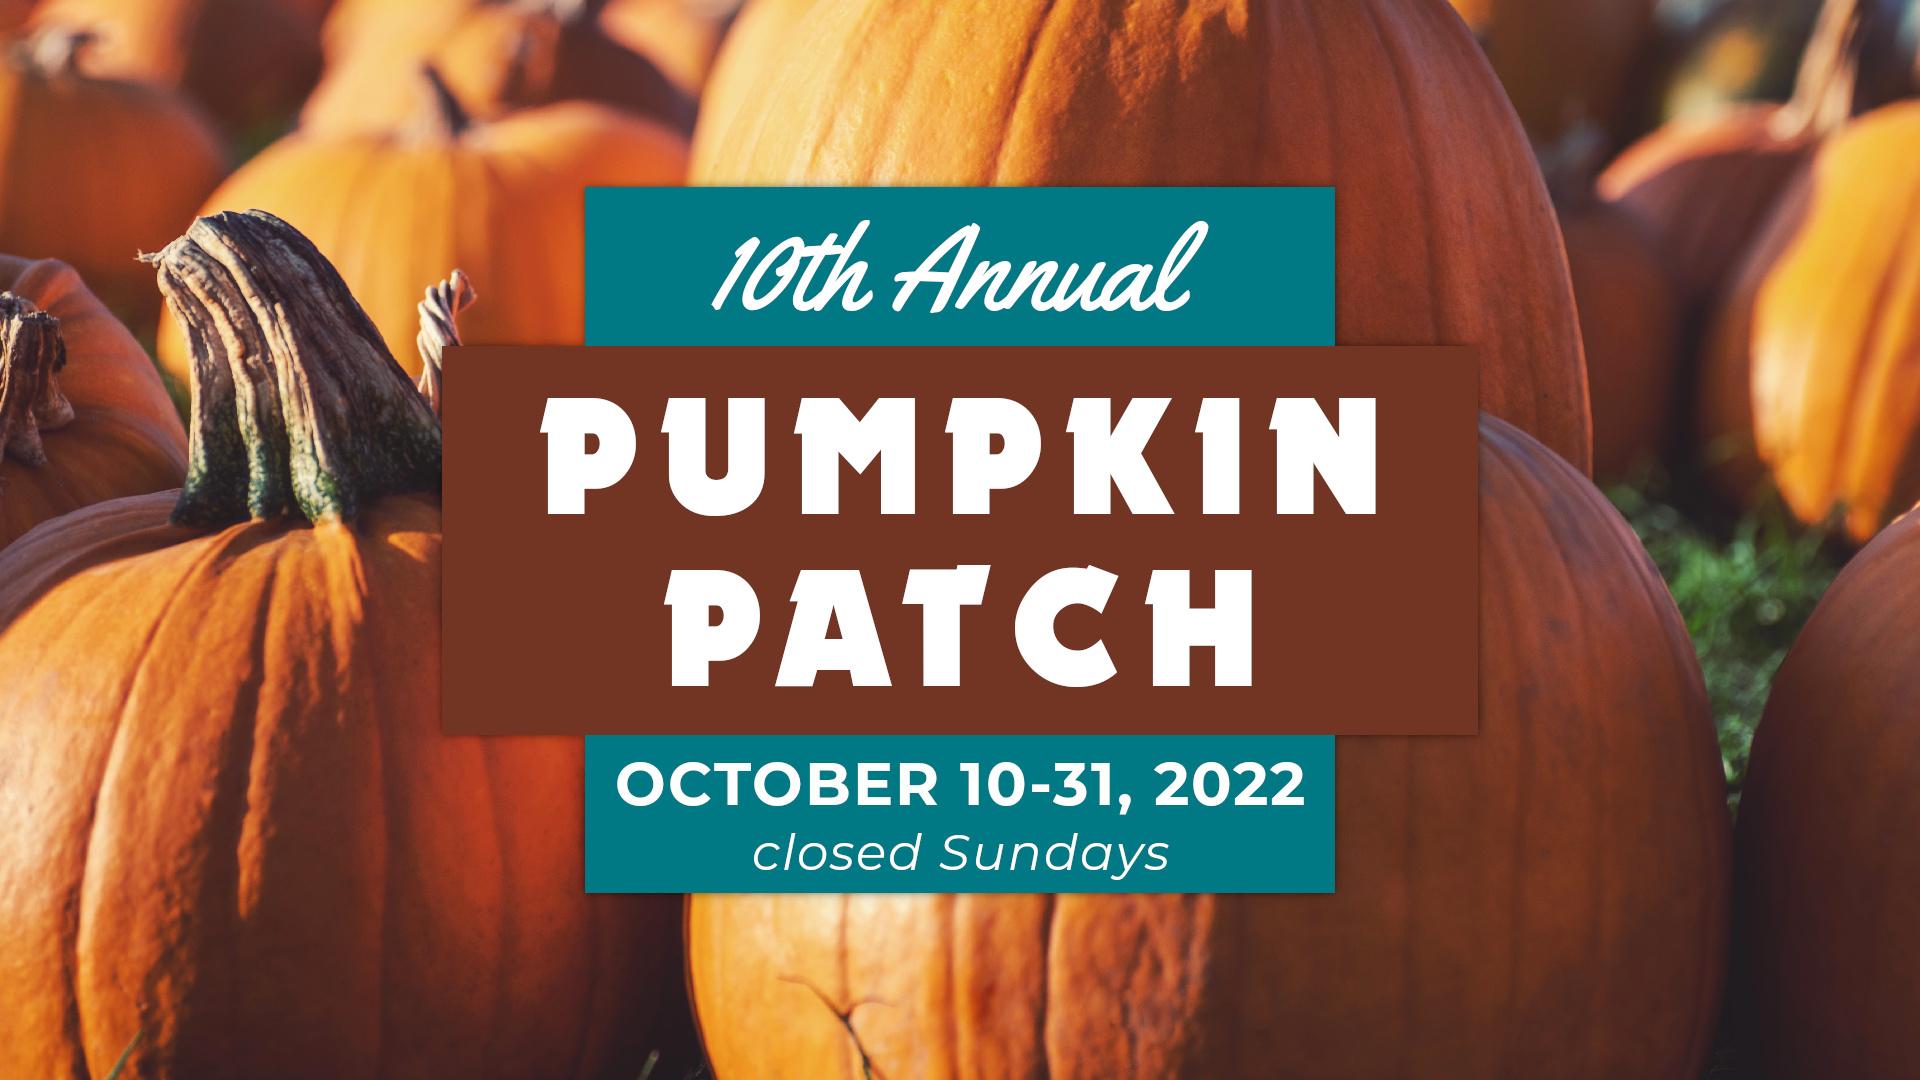 10th Annual Pumpkin Patch at Cornerstone Baptist on October 10-31